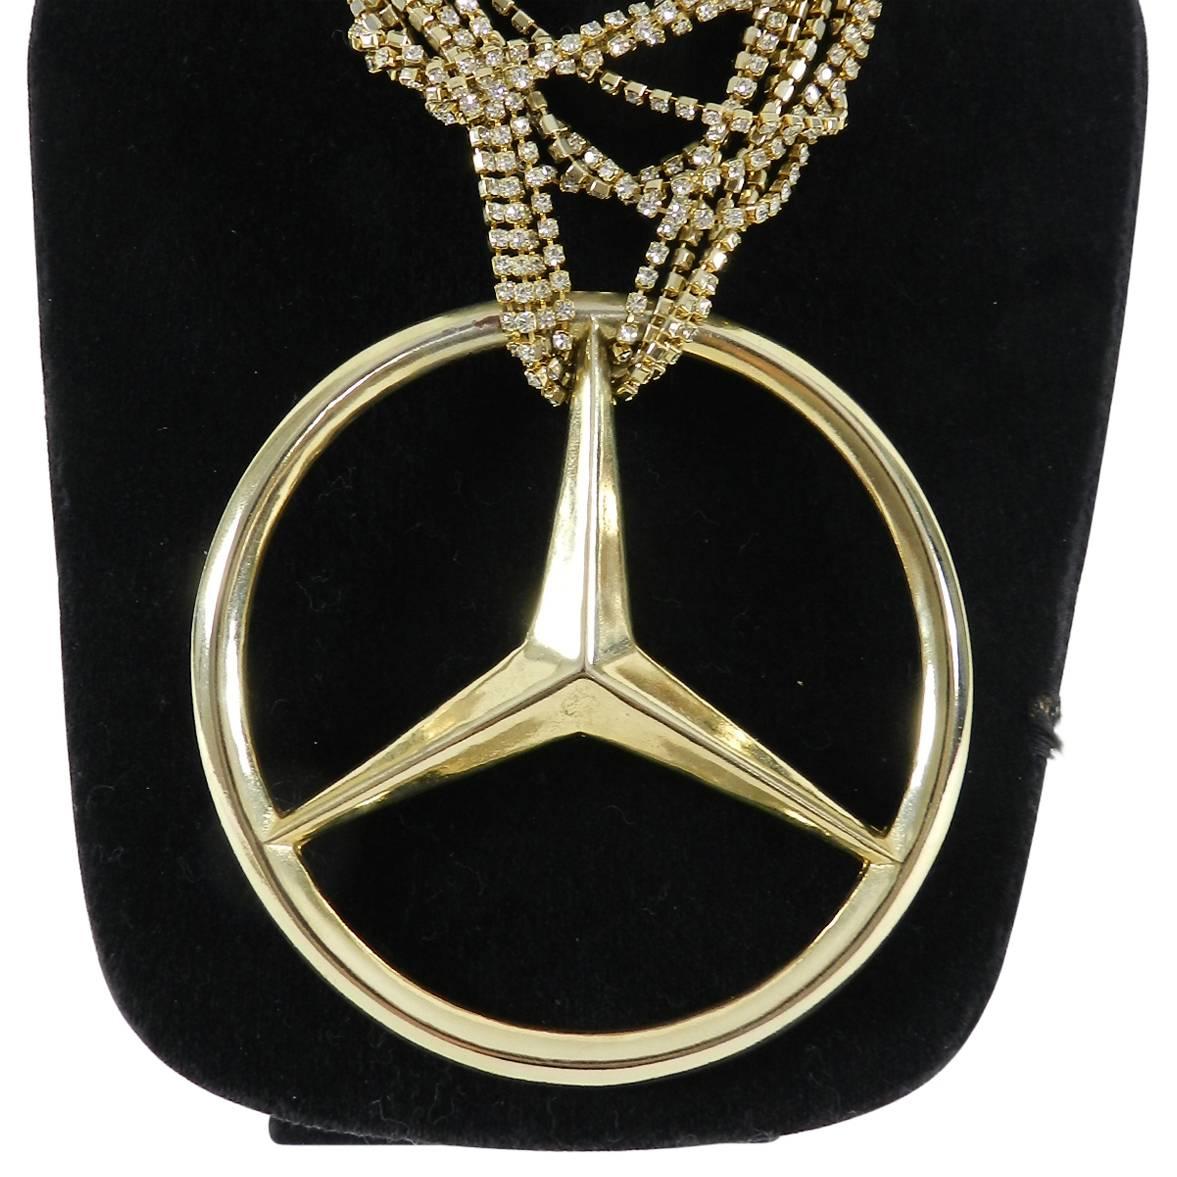 Tom Binns “Uber Urban Mercedes” Statement Necklace.  $2987 CAD original retail. Tom Binns has collaborated with many designers including Malcolm McLaren and Vivienne Westwood, and is a favourite of celebrities including Michelle Obama. This large